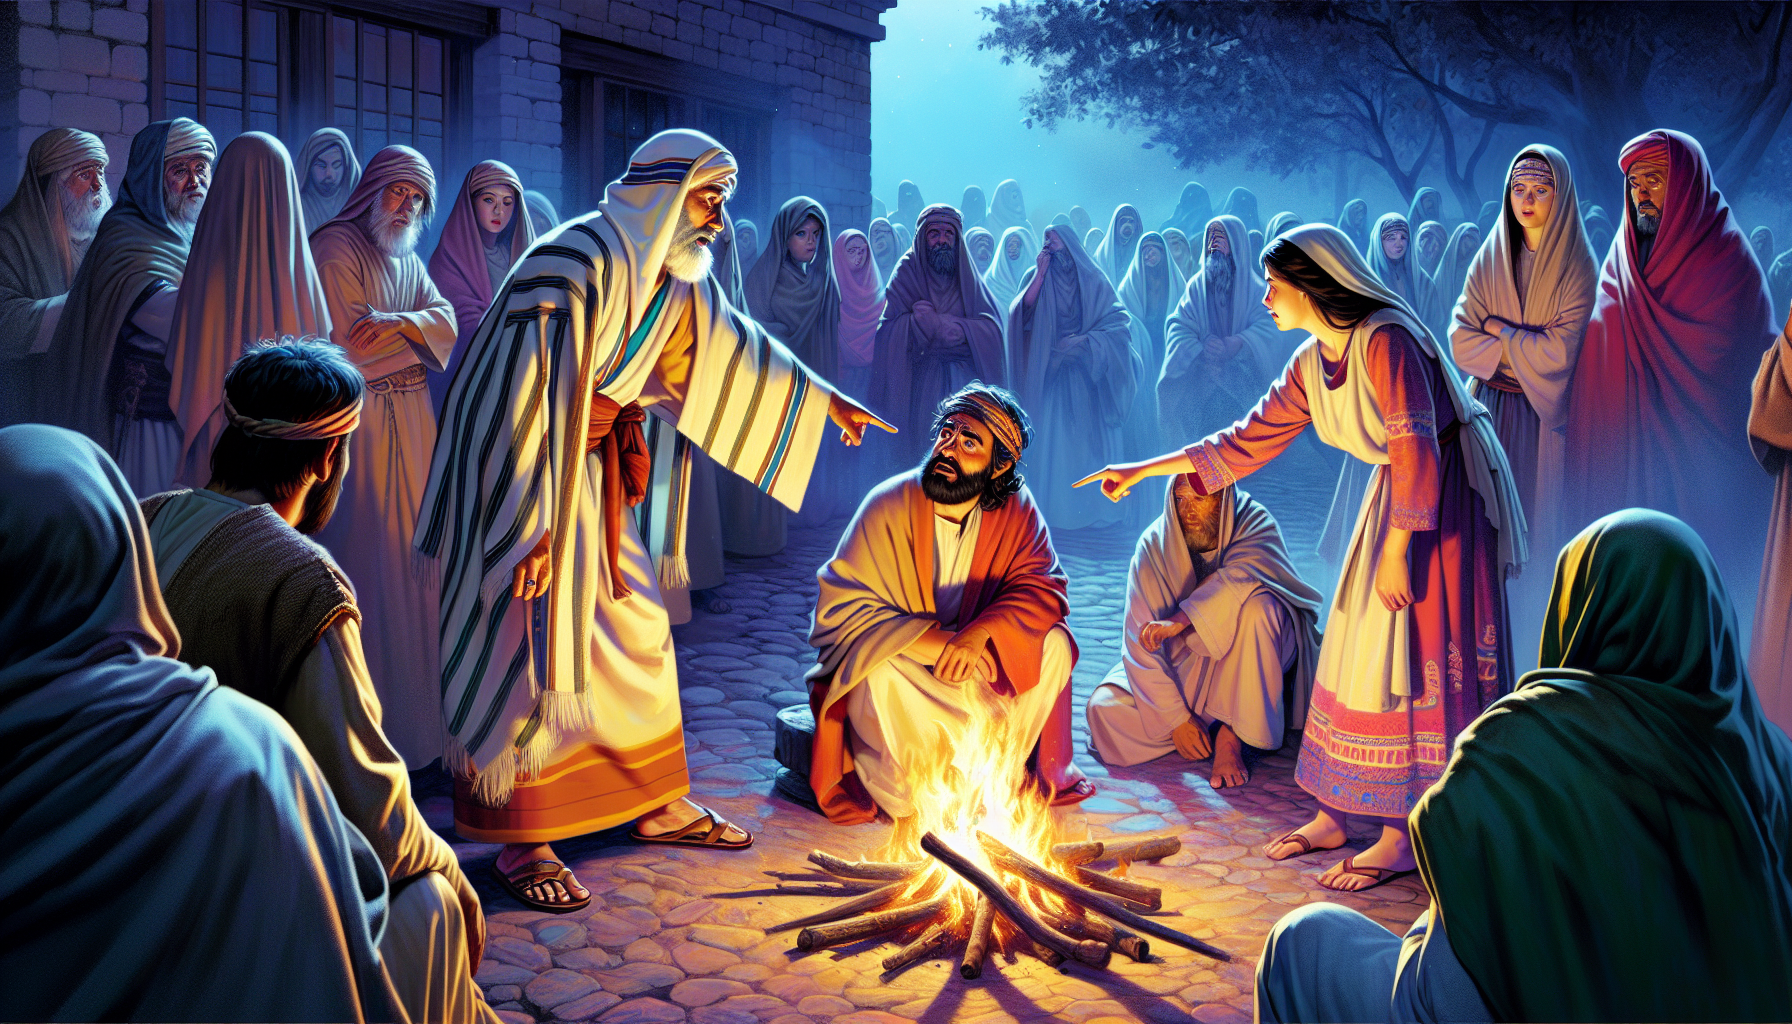 Create a detailed illustration of the scene from Luke 22:55-62, where Peter denies knowing Jesus. The image should depict the outdoor setting with a fire burning in the center, surrounded by people wa